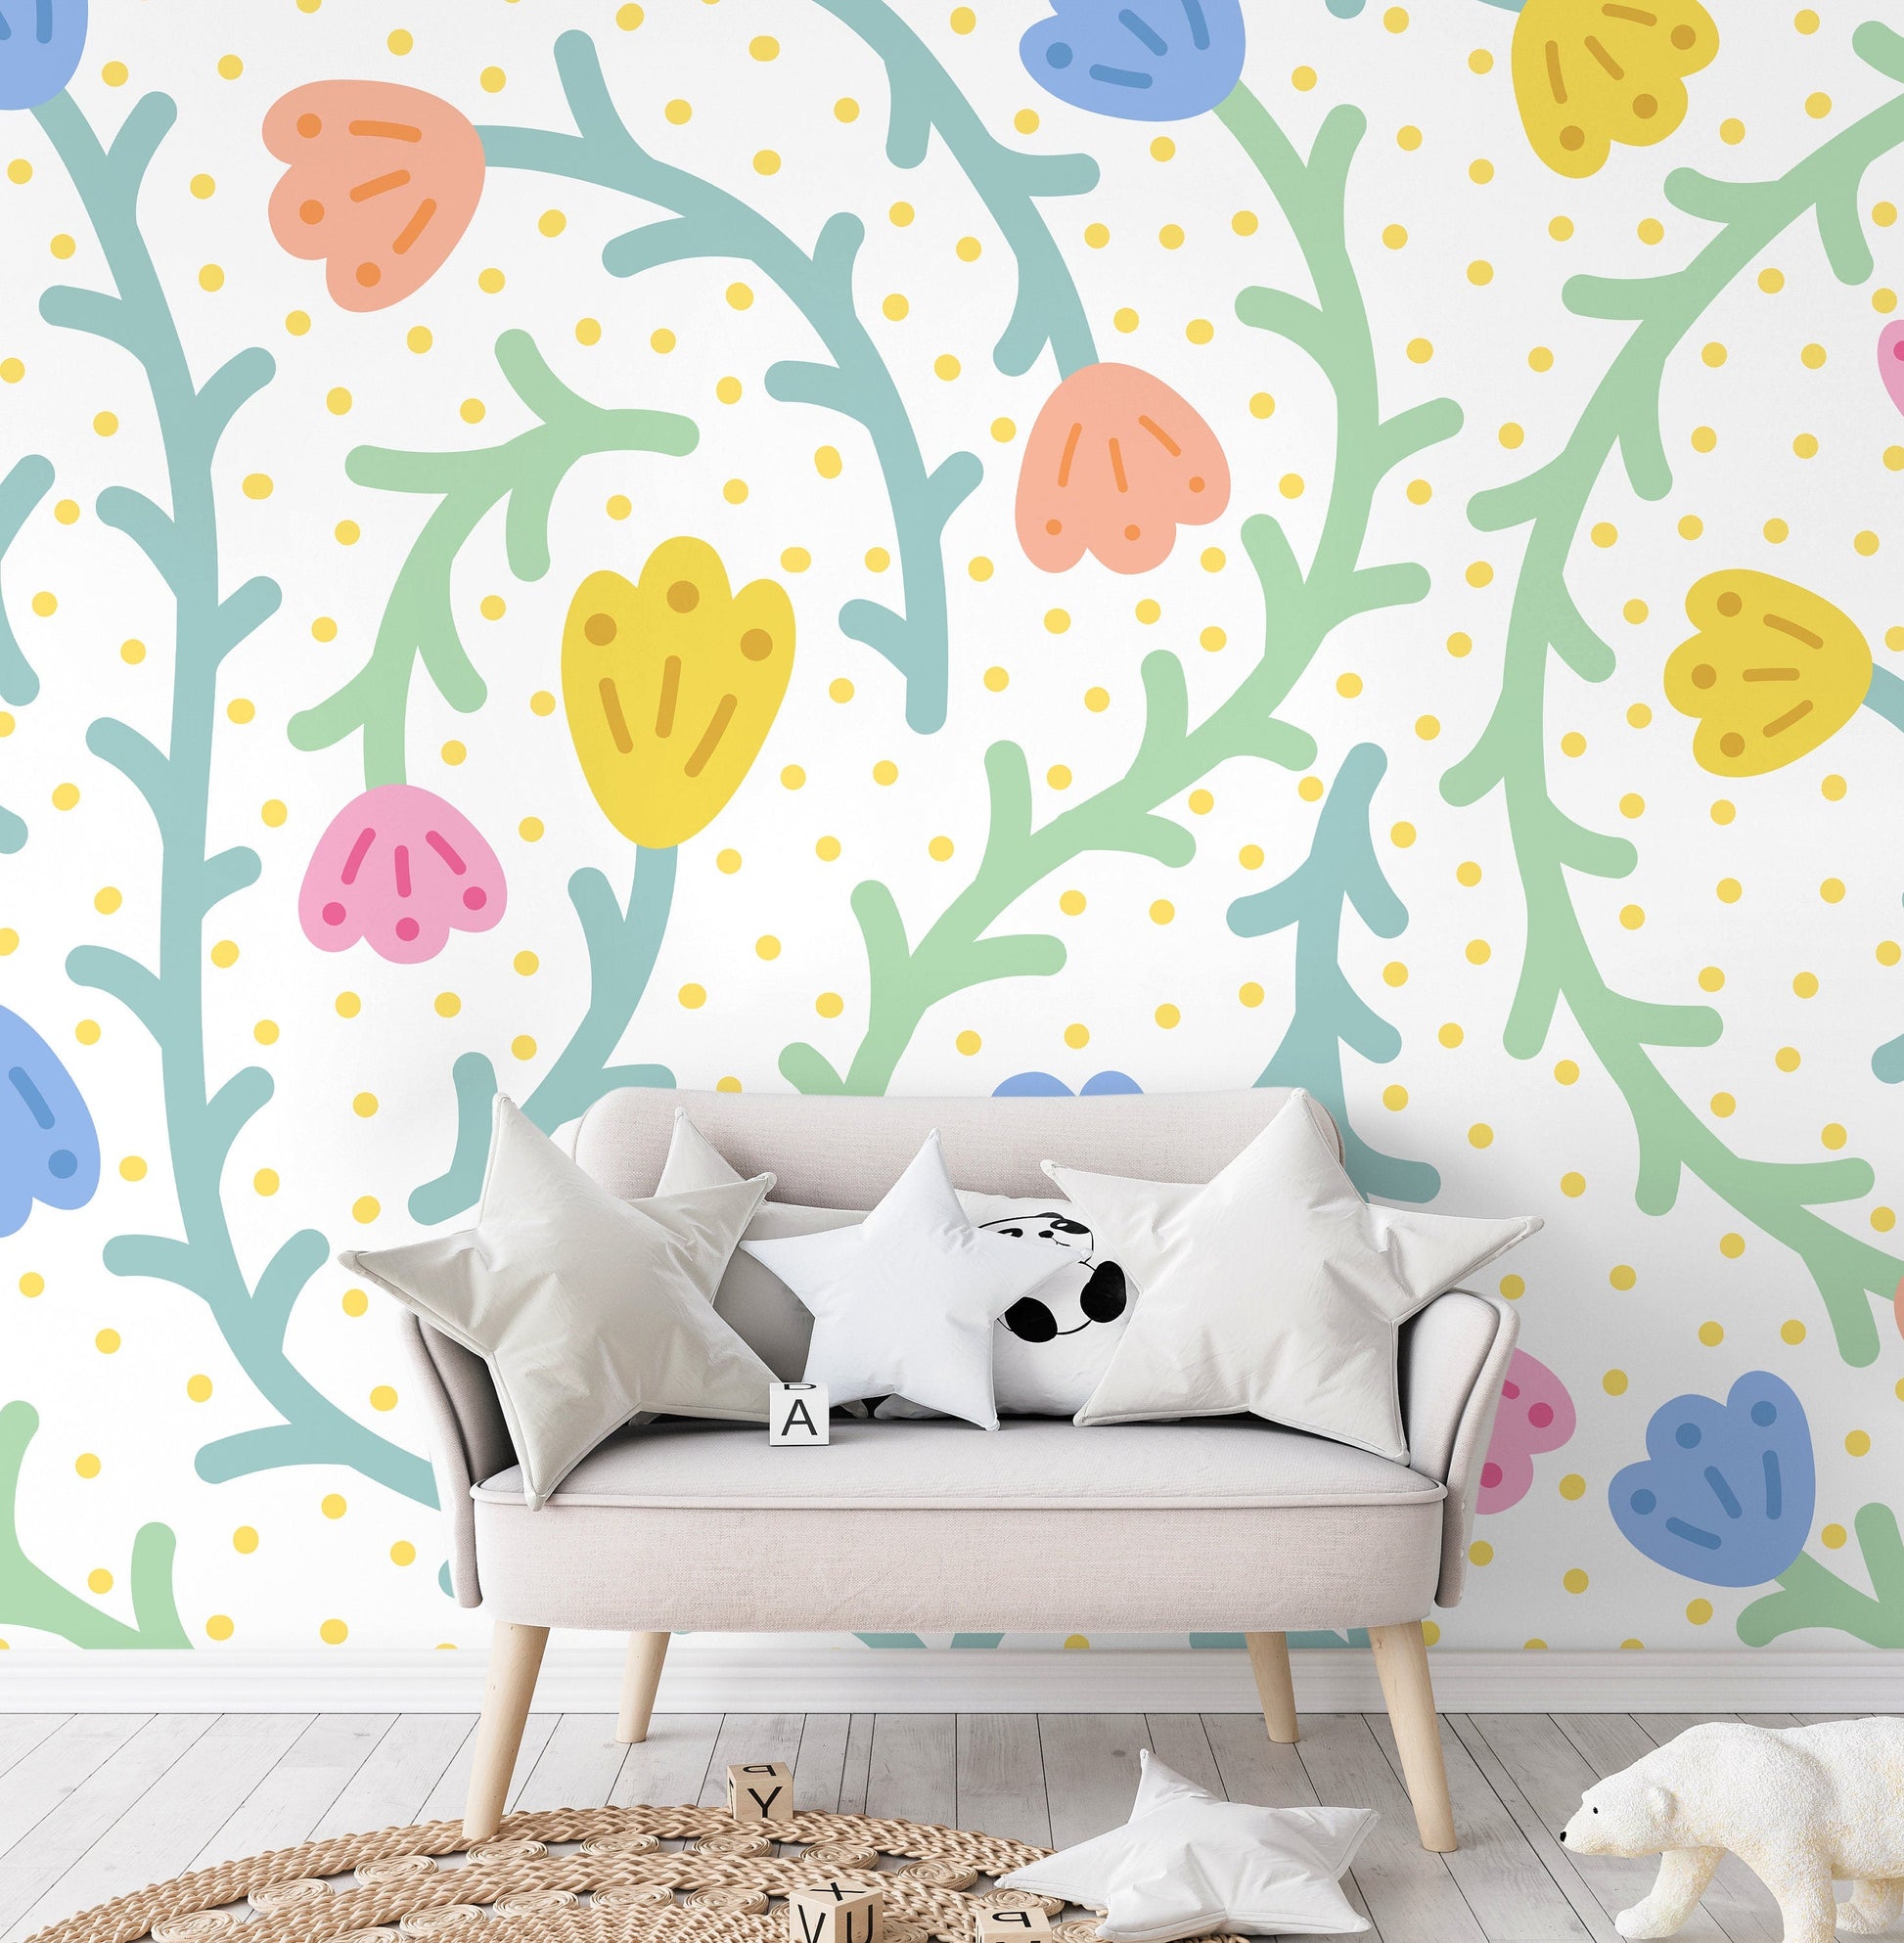 Wallpaper Peel and Stick Wallpaper Removable Wallpaper Home Decor Wall Art Wall Decor Room Decor / Colorful Floral Kid Wallpaper - C474